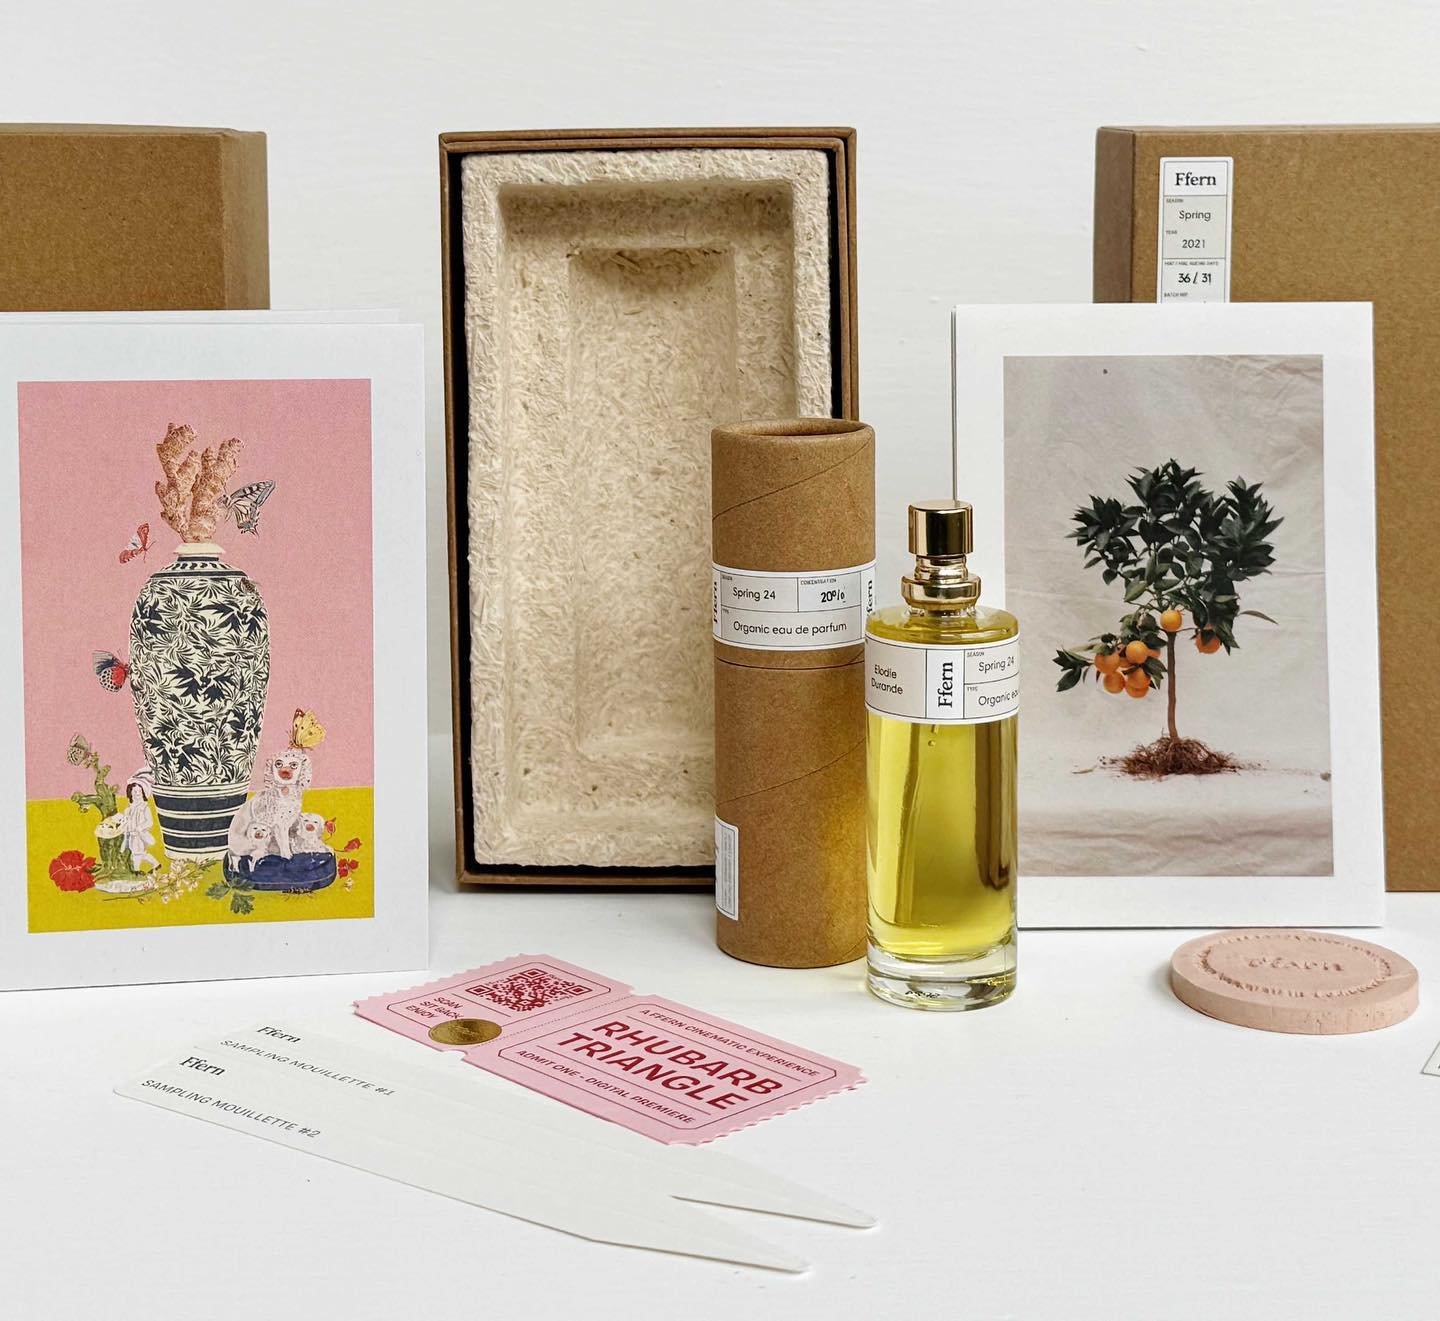 Jo&rsquo;s Scent Notes: @ffern.co natural fragrances ✨

Introducing Ffern, a beautiful, natural fragrance brand based in the West Country, founded by a brother and sister team, Owen Mears and Emily Cameron, who were inspired by the countryside lifest